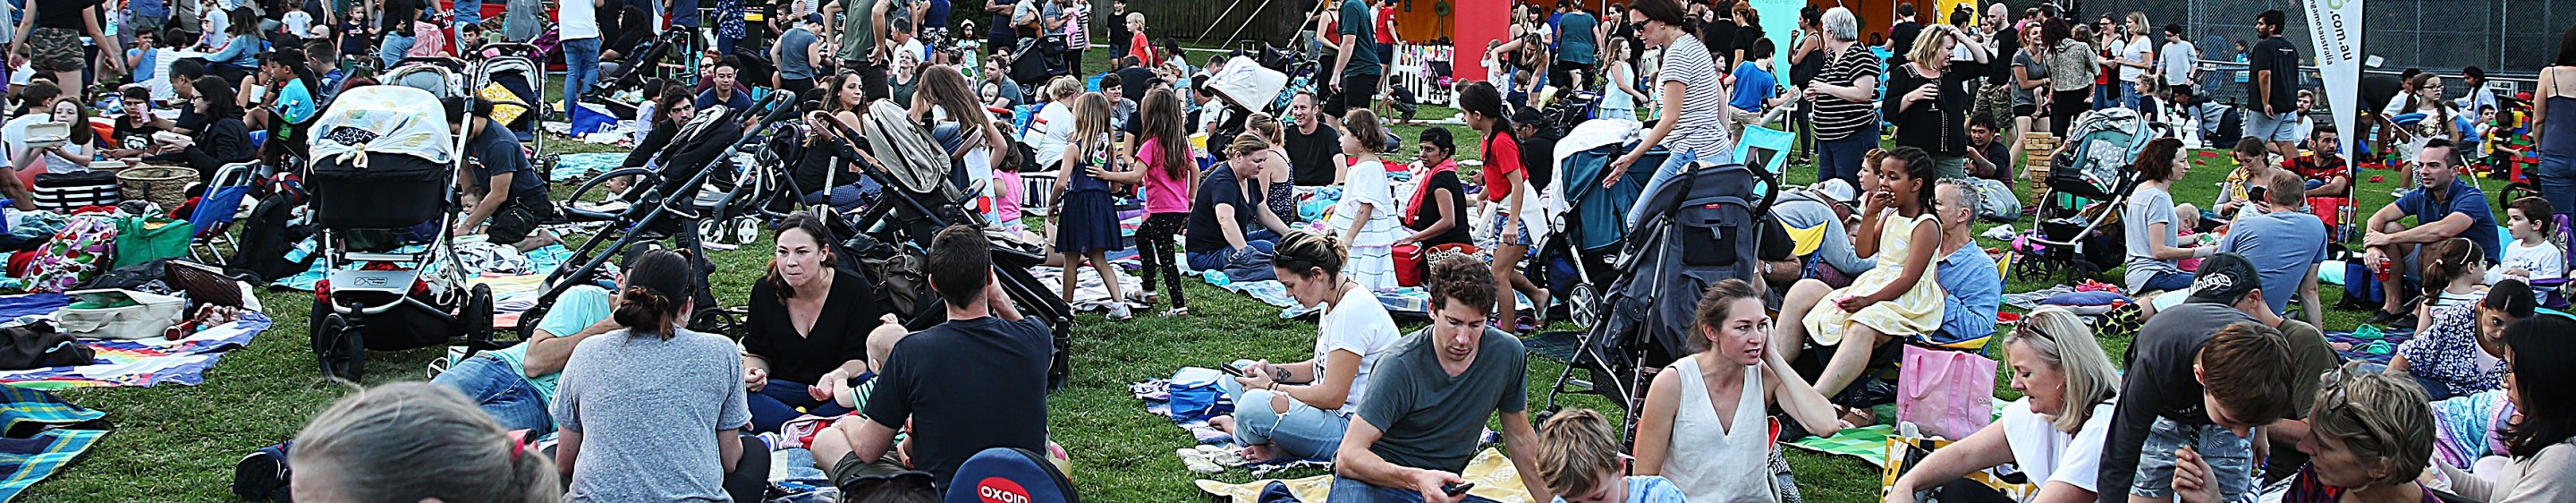 Large crowd of diverse people sitting in a park on picnic blankets facing to the left of the frame